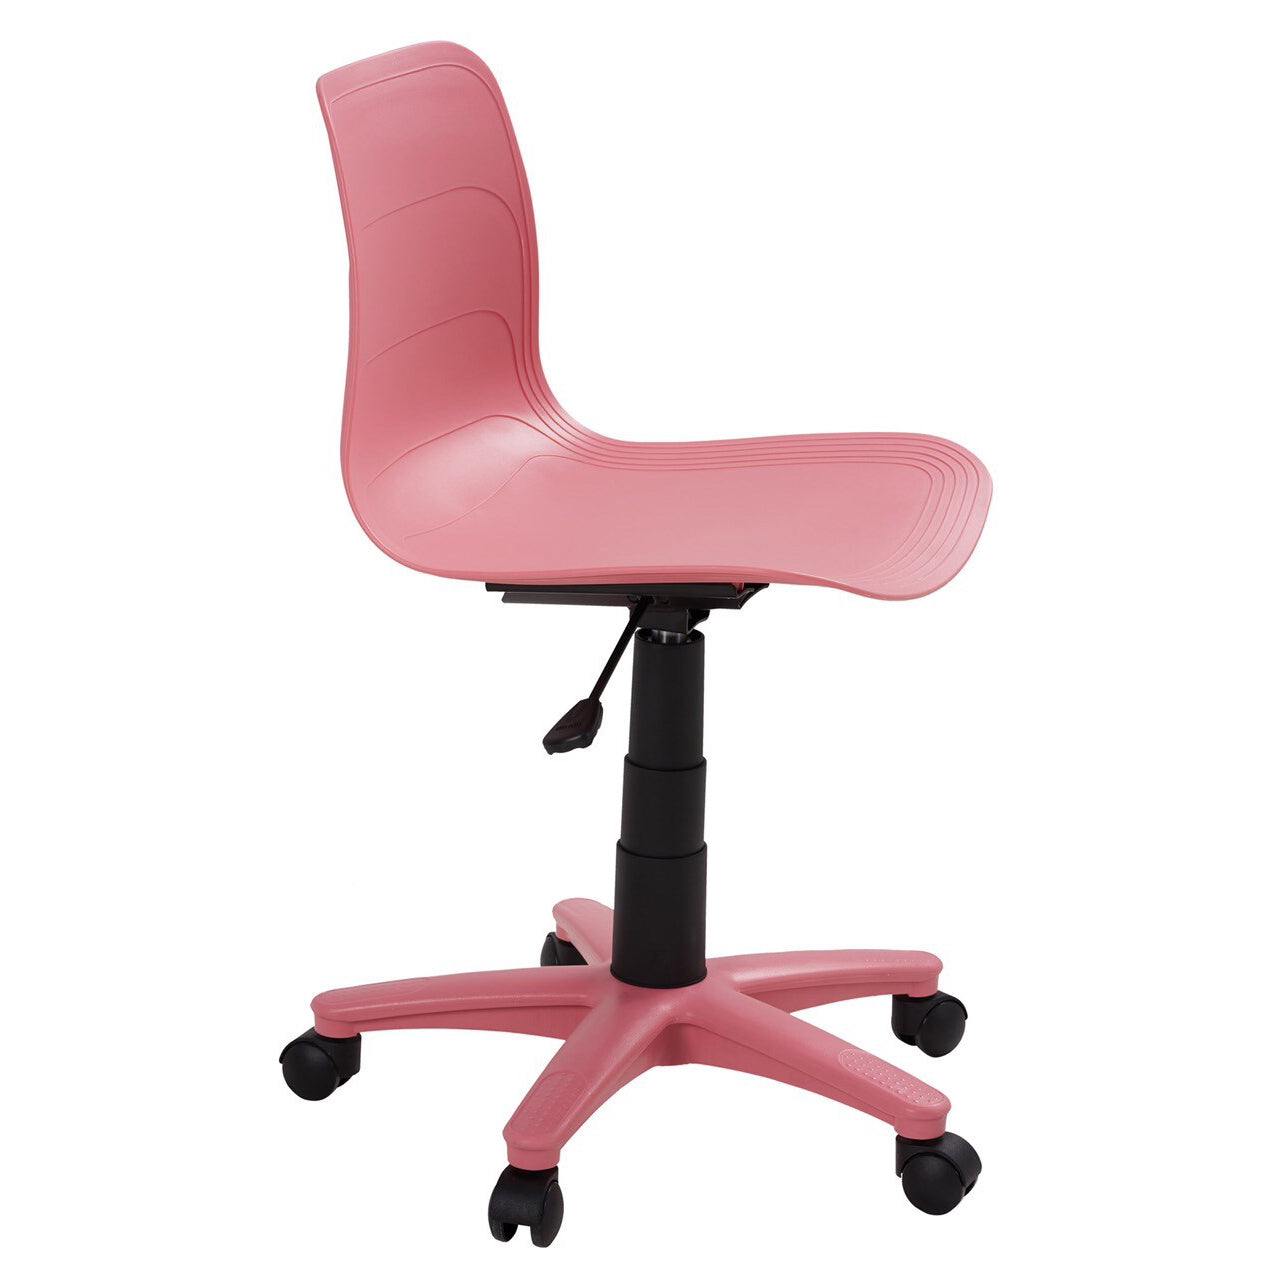 Plastic Swivel Chair Your Ultimate Outdoor Seating Solution (Pink) HIFUWA-X1